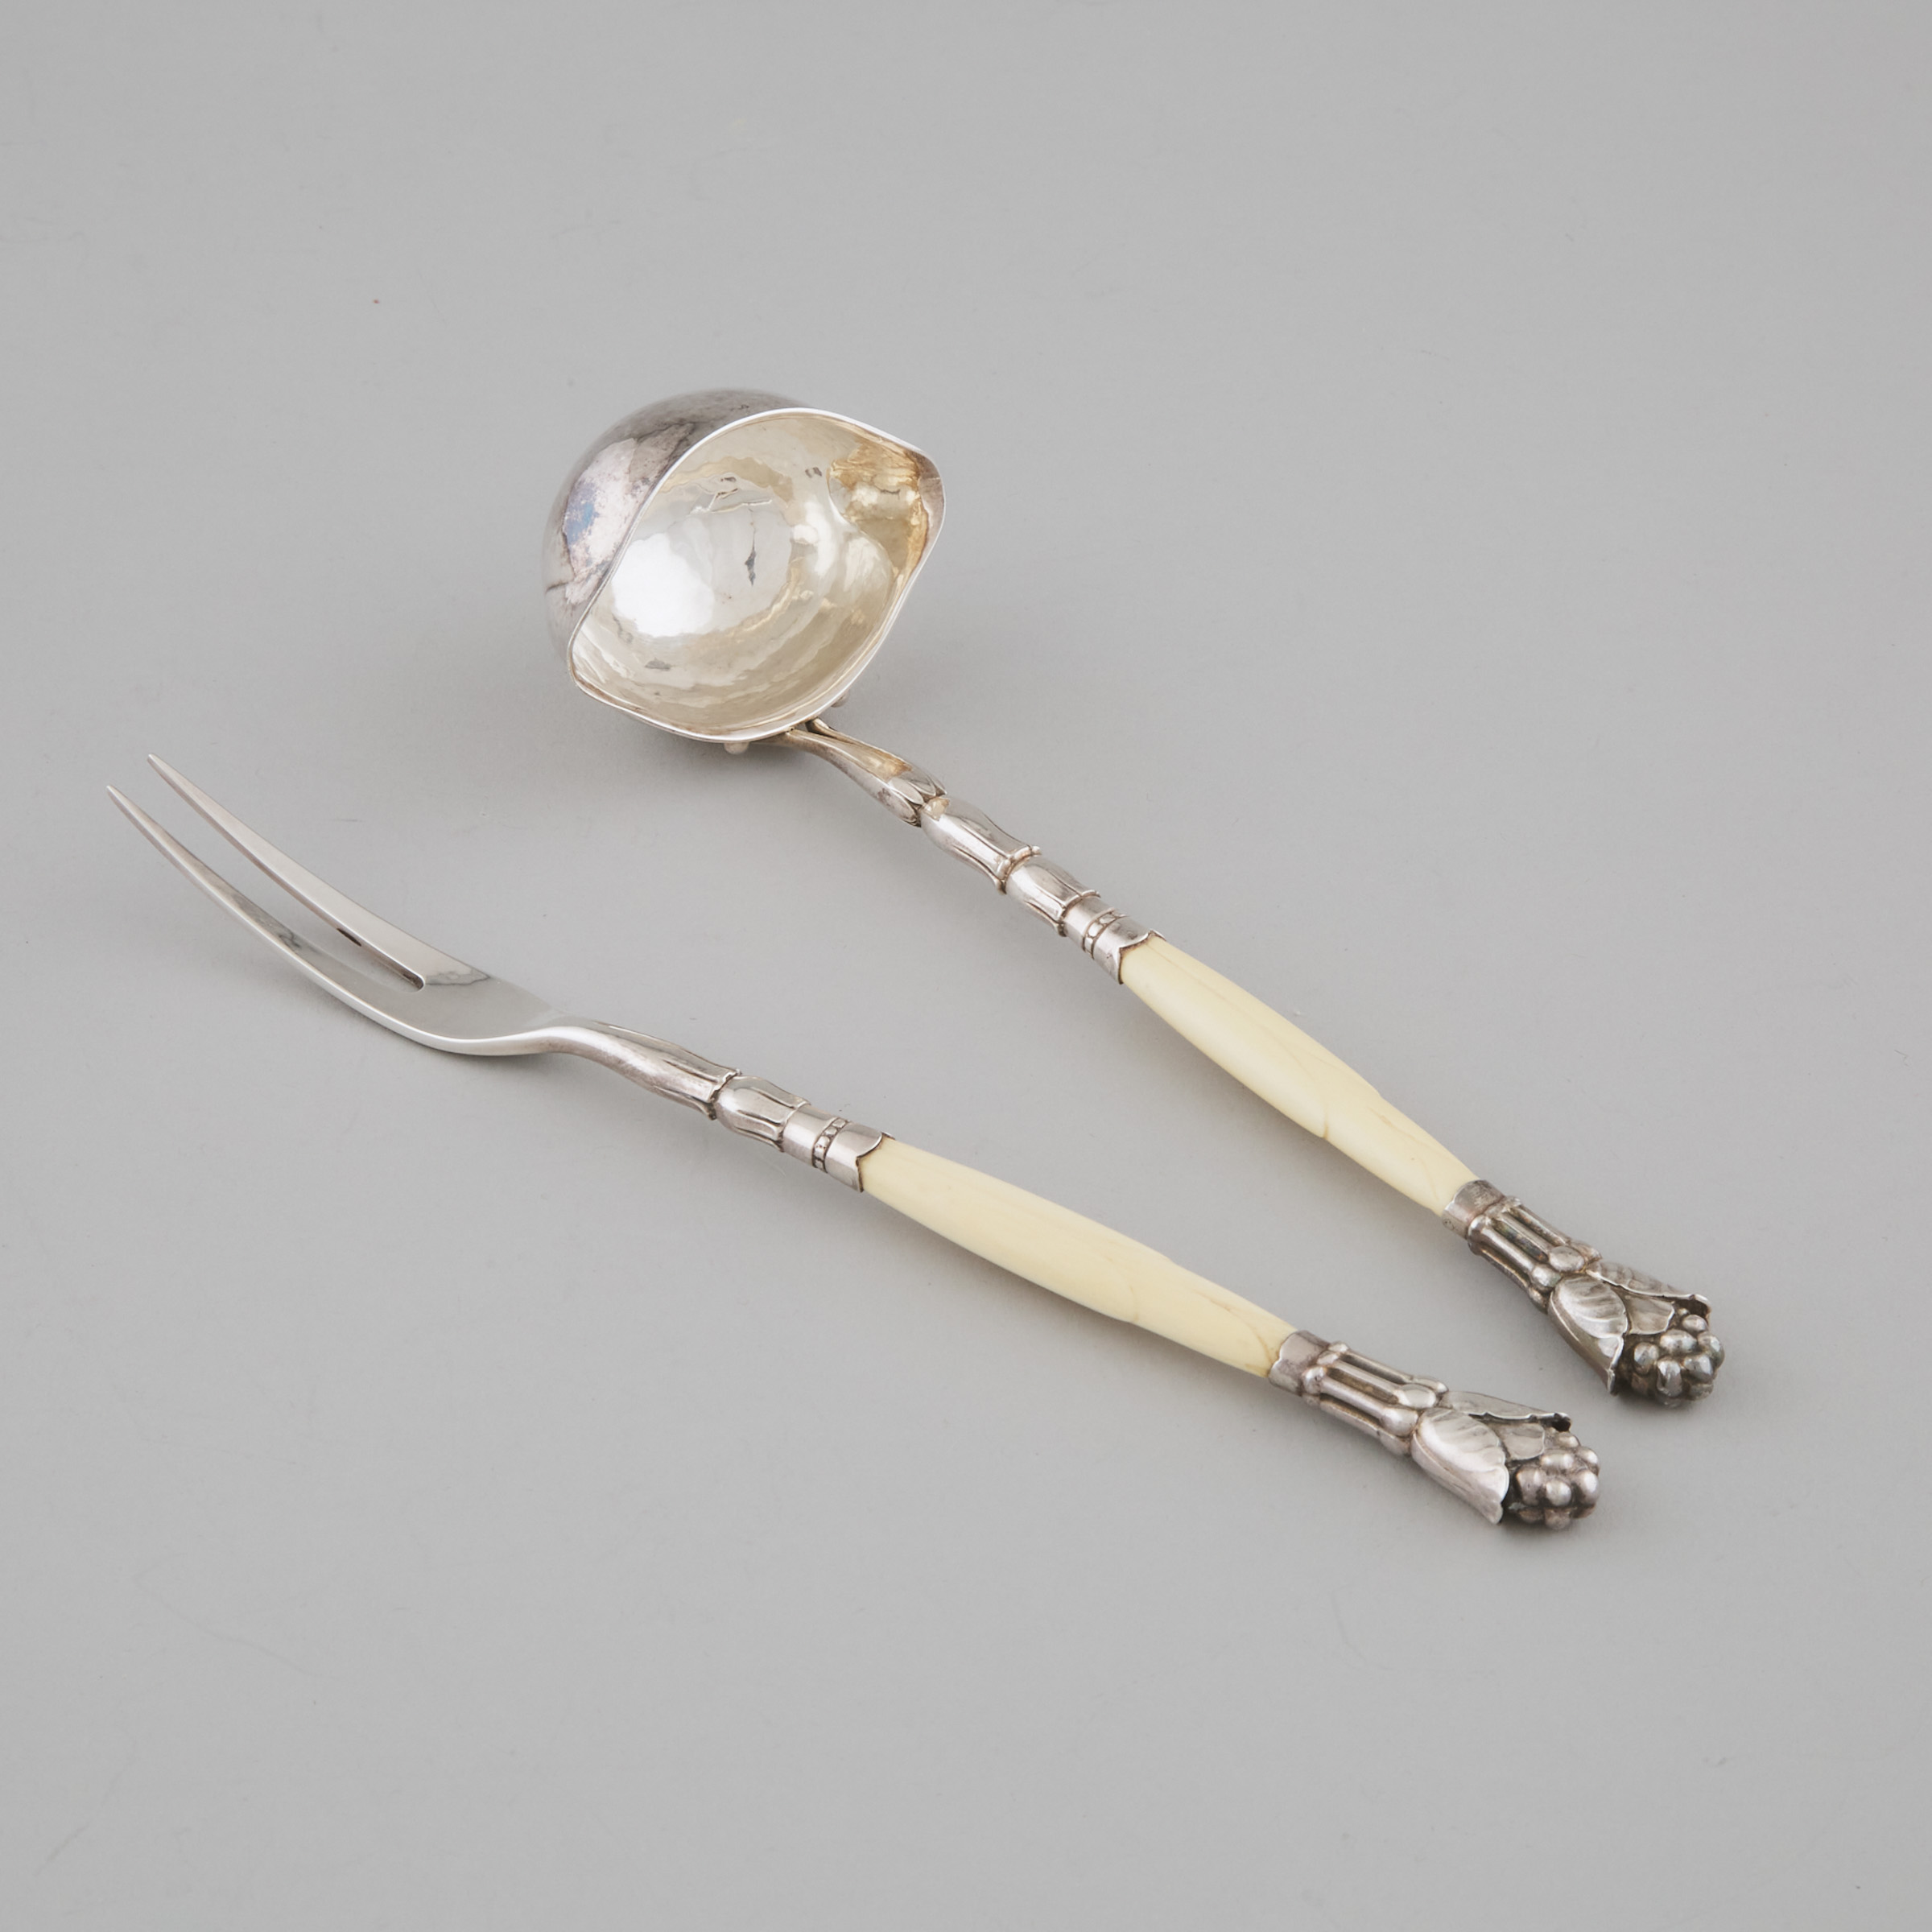 Danish Silver and Carved Ivory